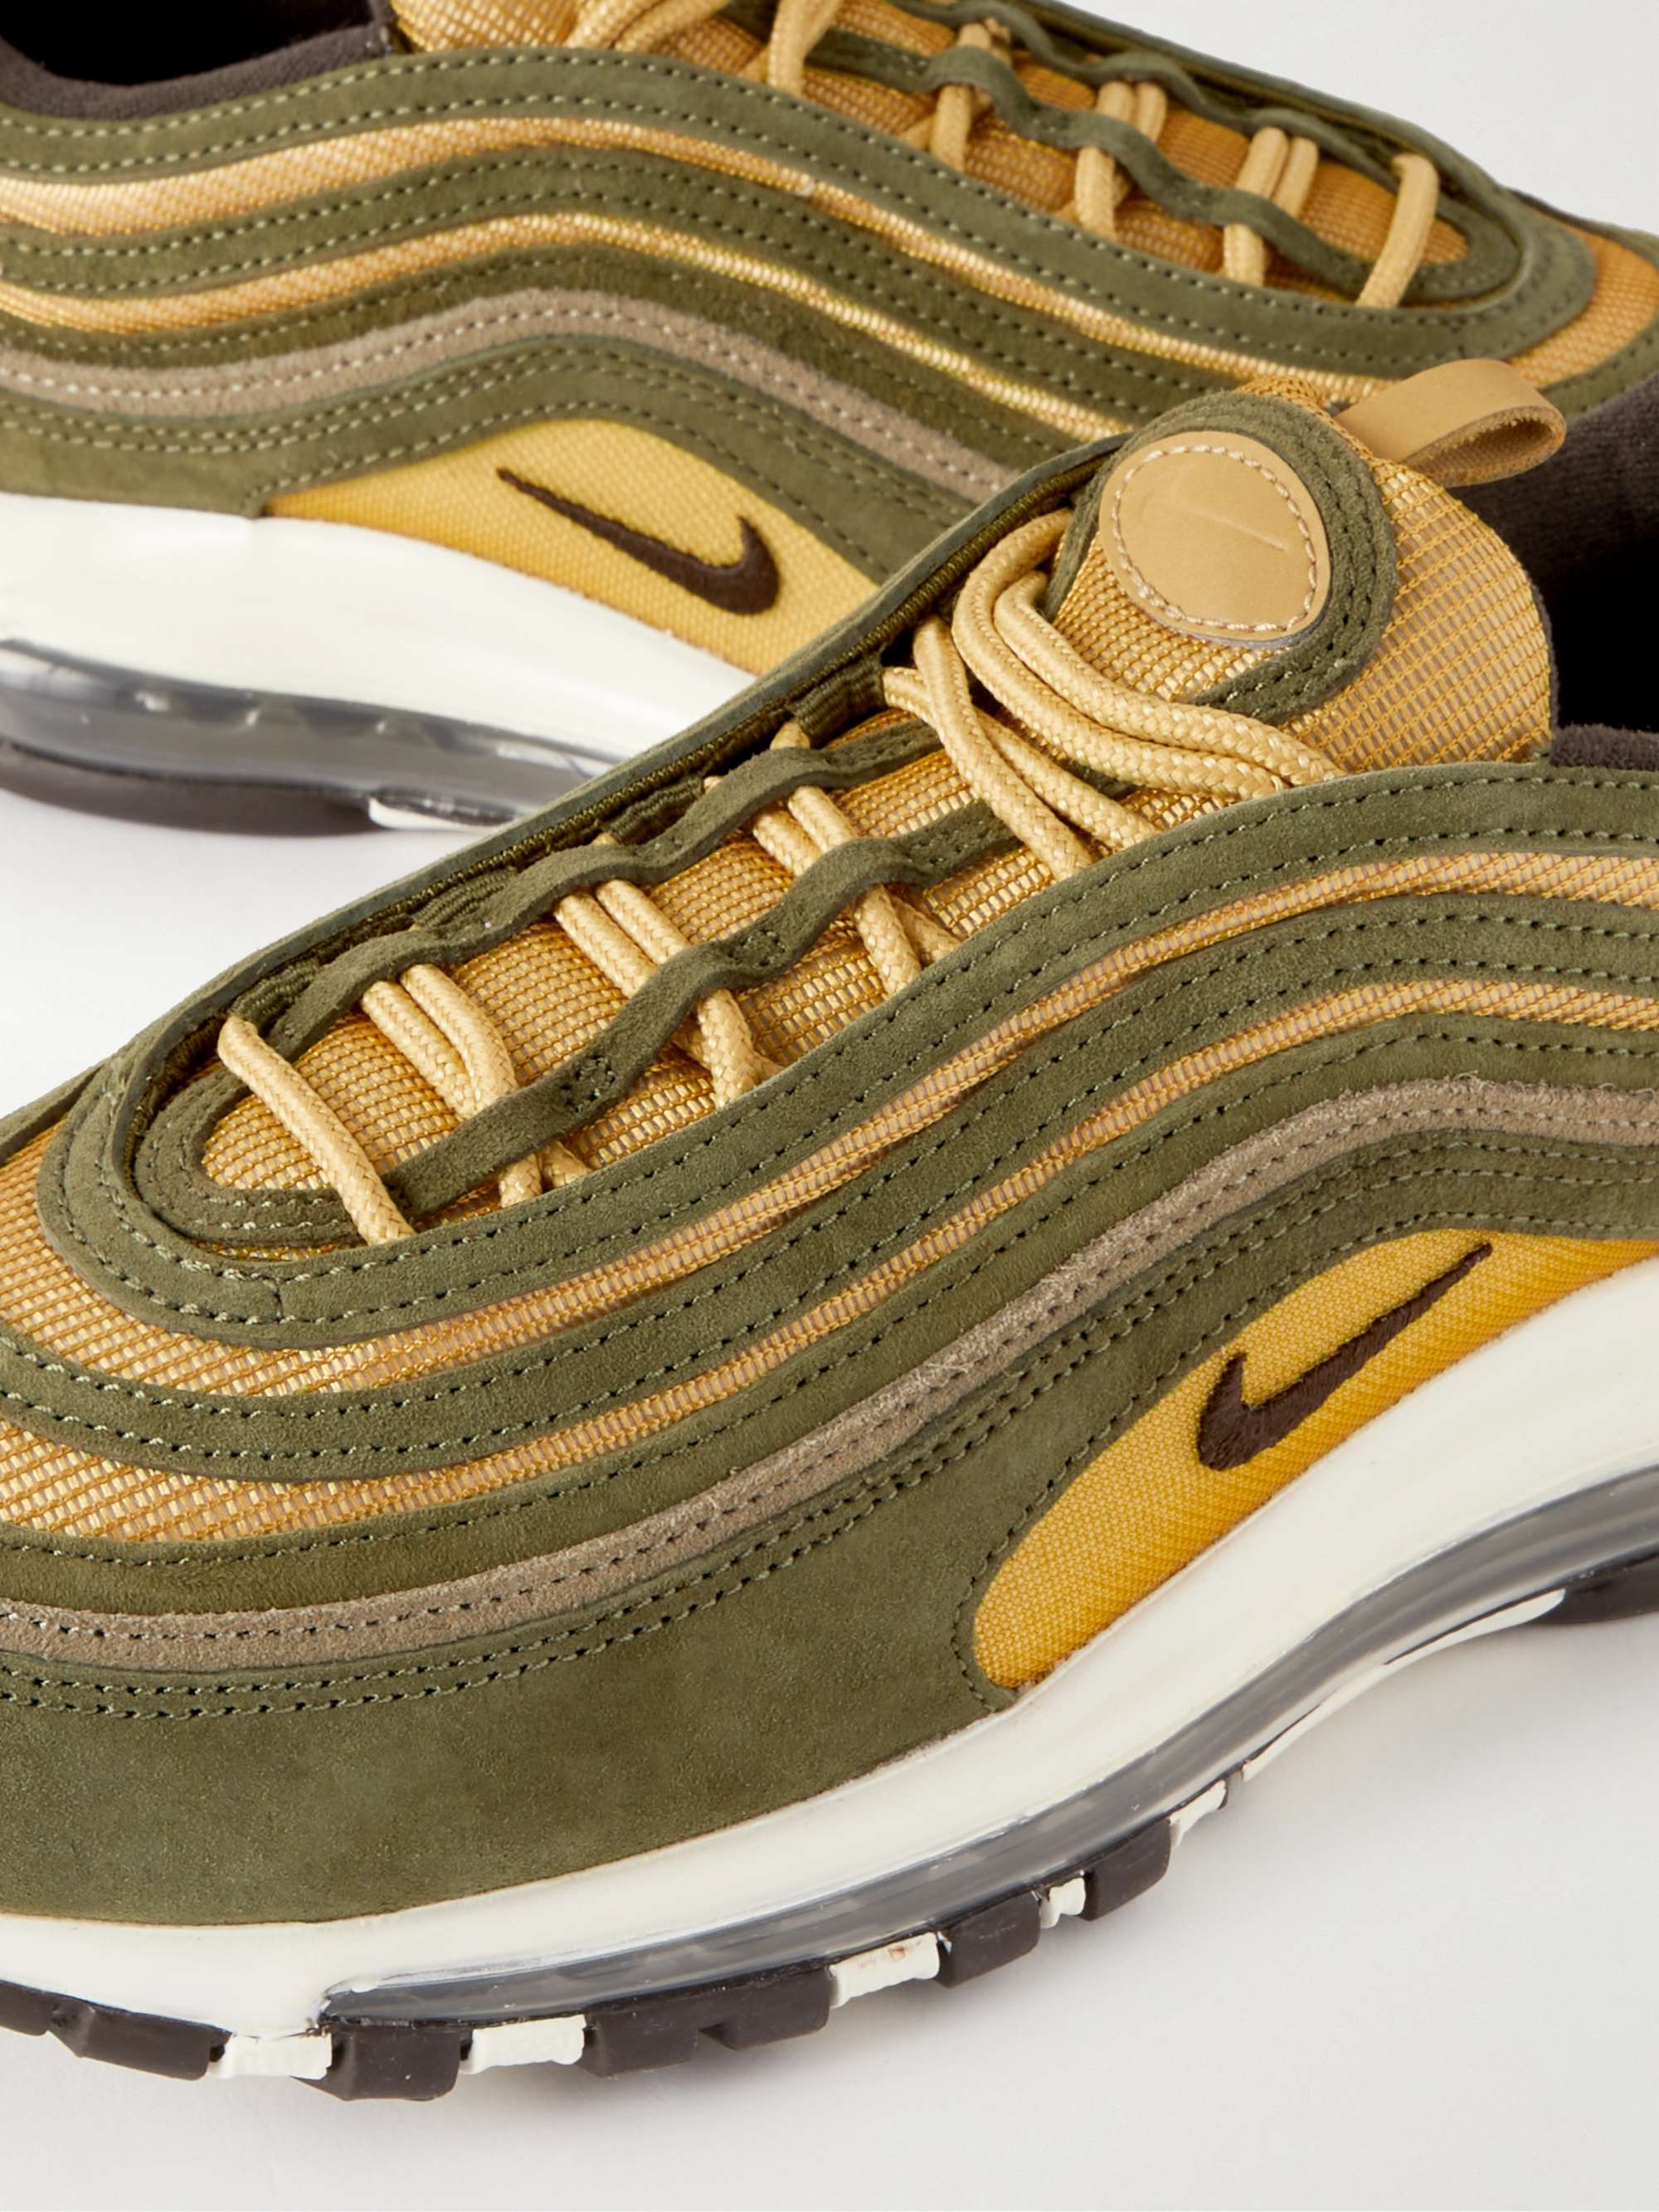 NIKE Air Max 97 Suede and Mesh Sneakers